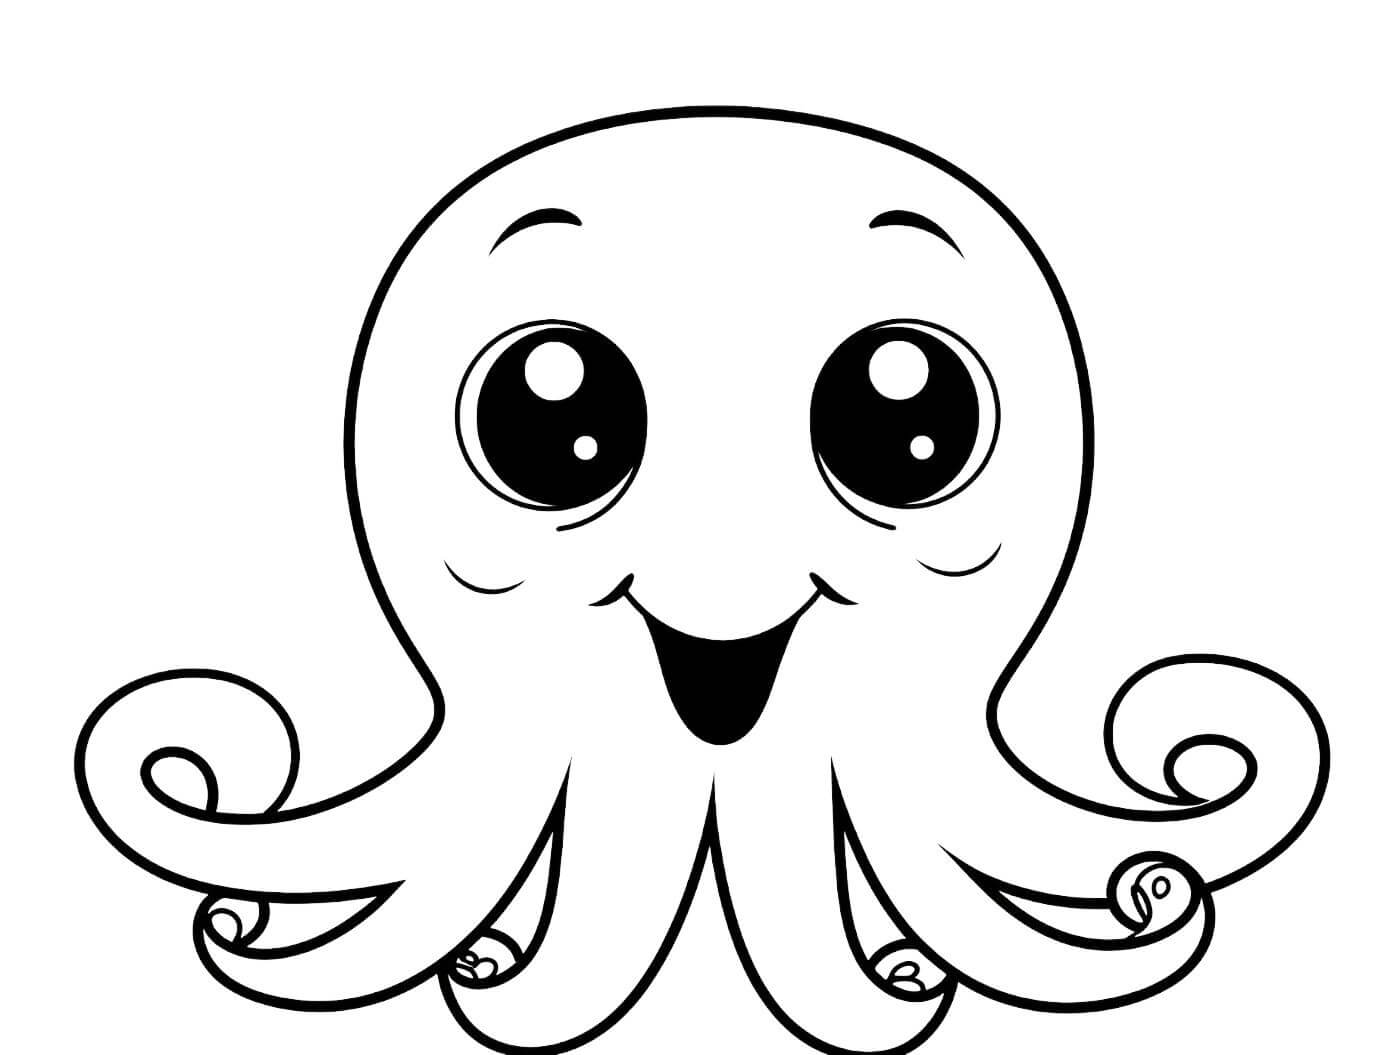 Mastering Octopus Drawing: Step-by-Step Guide for Beginners